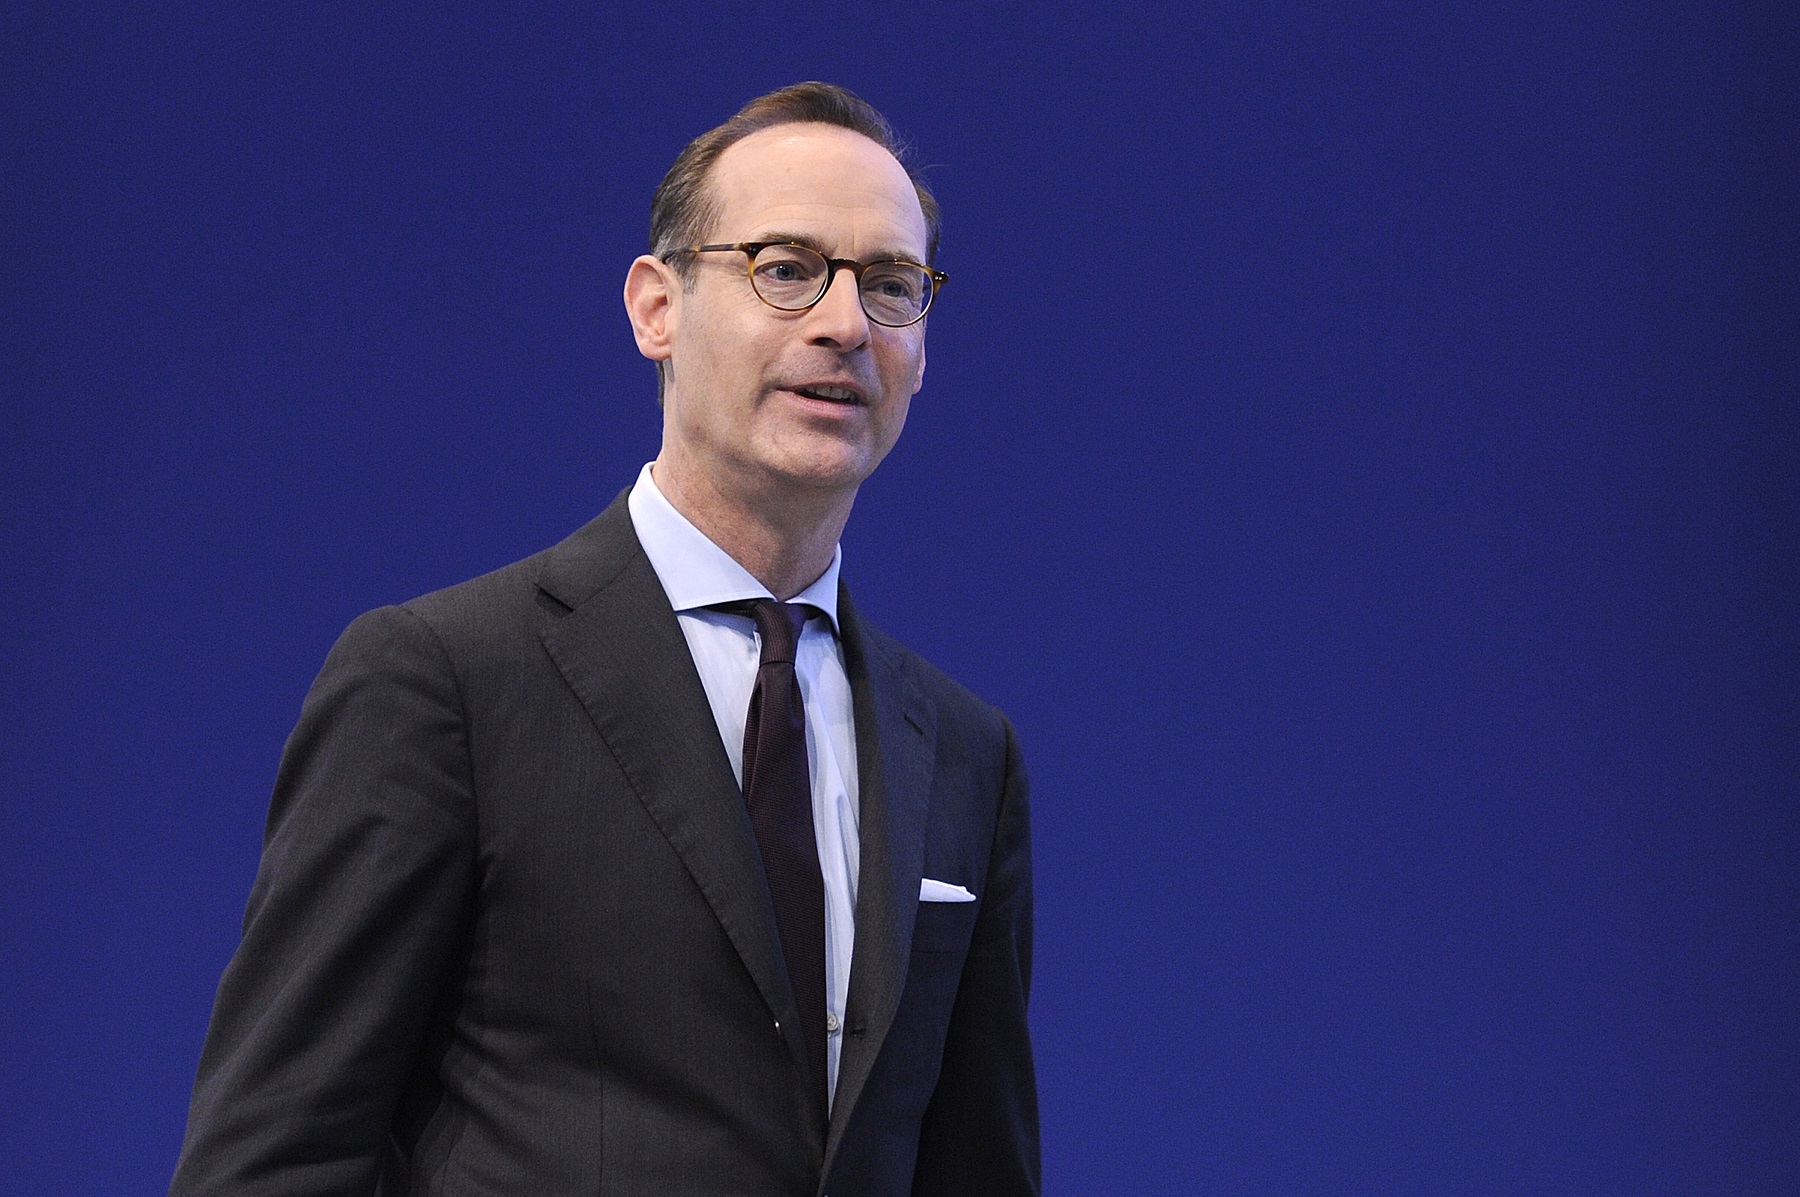 Allianz aims to double net zero asset commitments, says CEO at Davos